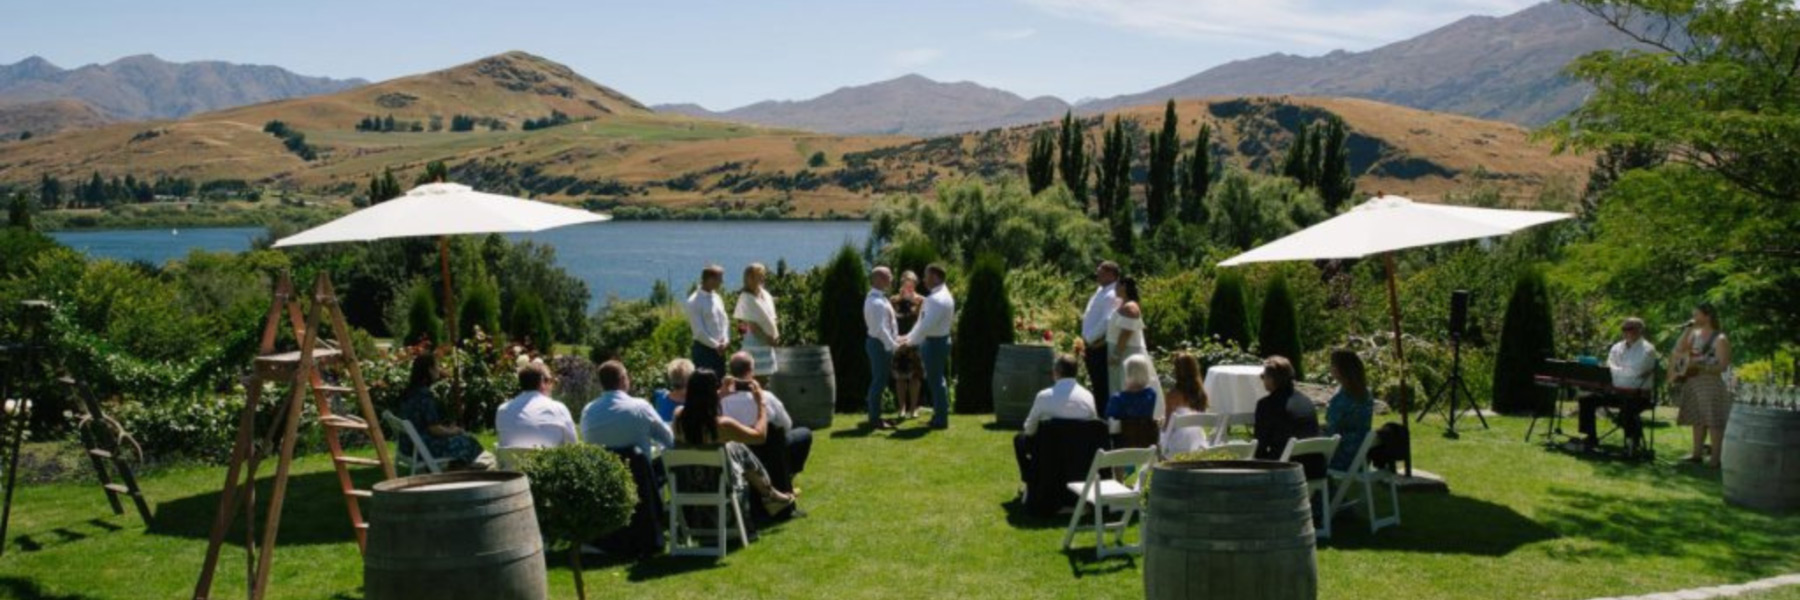 Anna Van Riel Nook Rd Productions Wanaka Wedding Singer And Entertainer